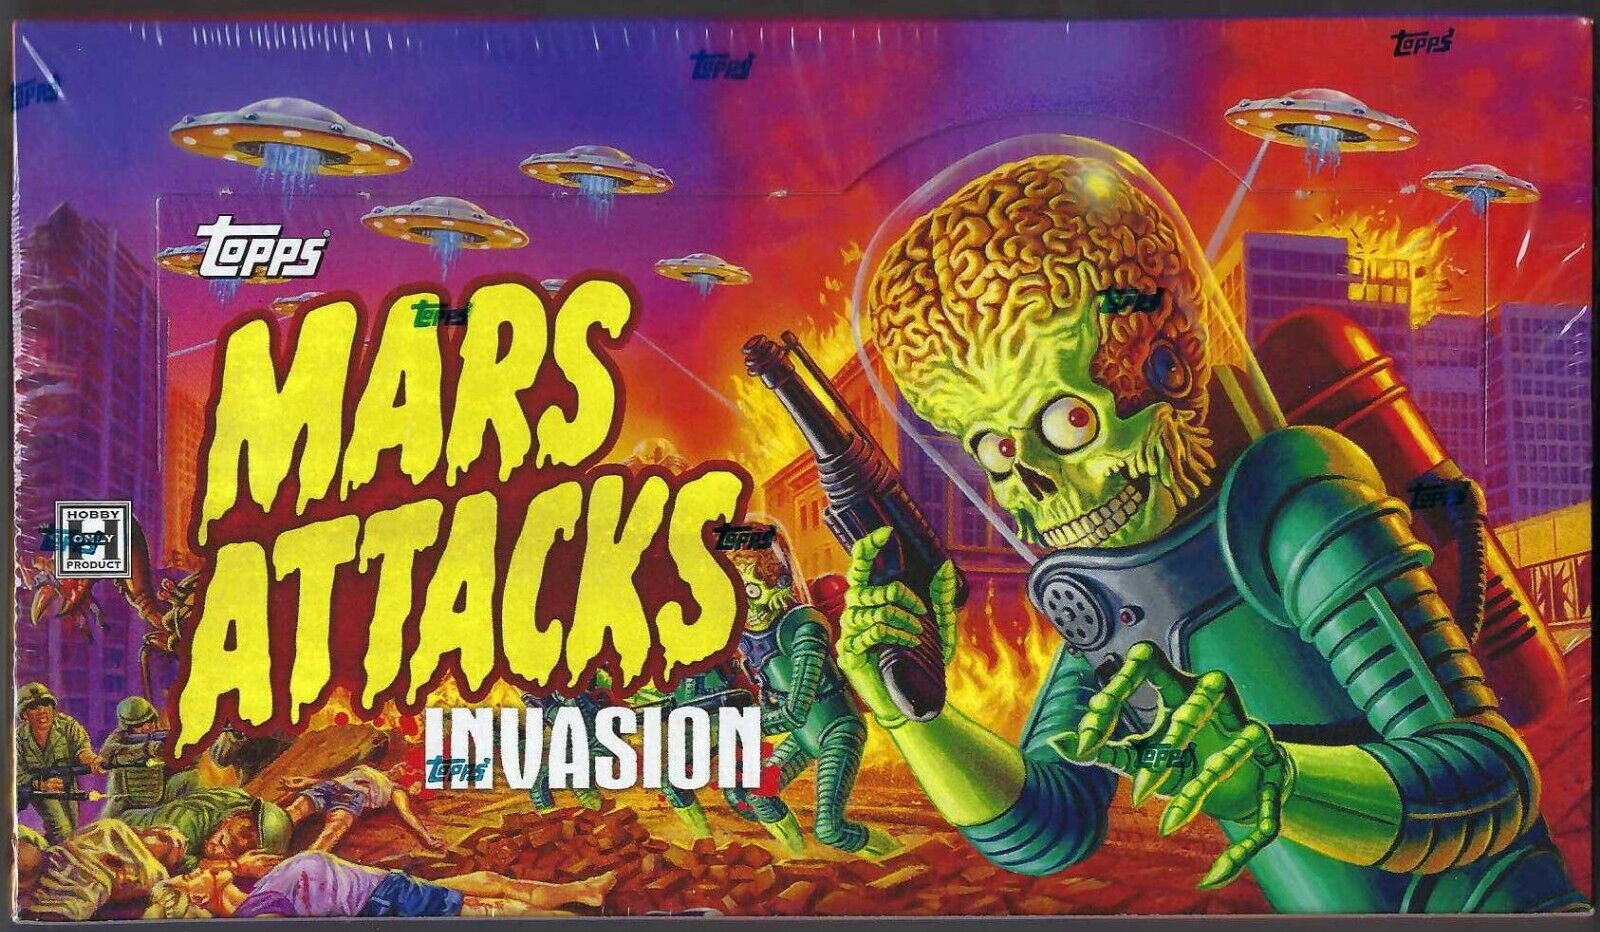 Mars Attacks Invasion Box  2013 Topps  New Sealed  2 HITS PER BOX + OTHER CHASE